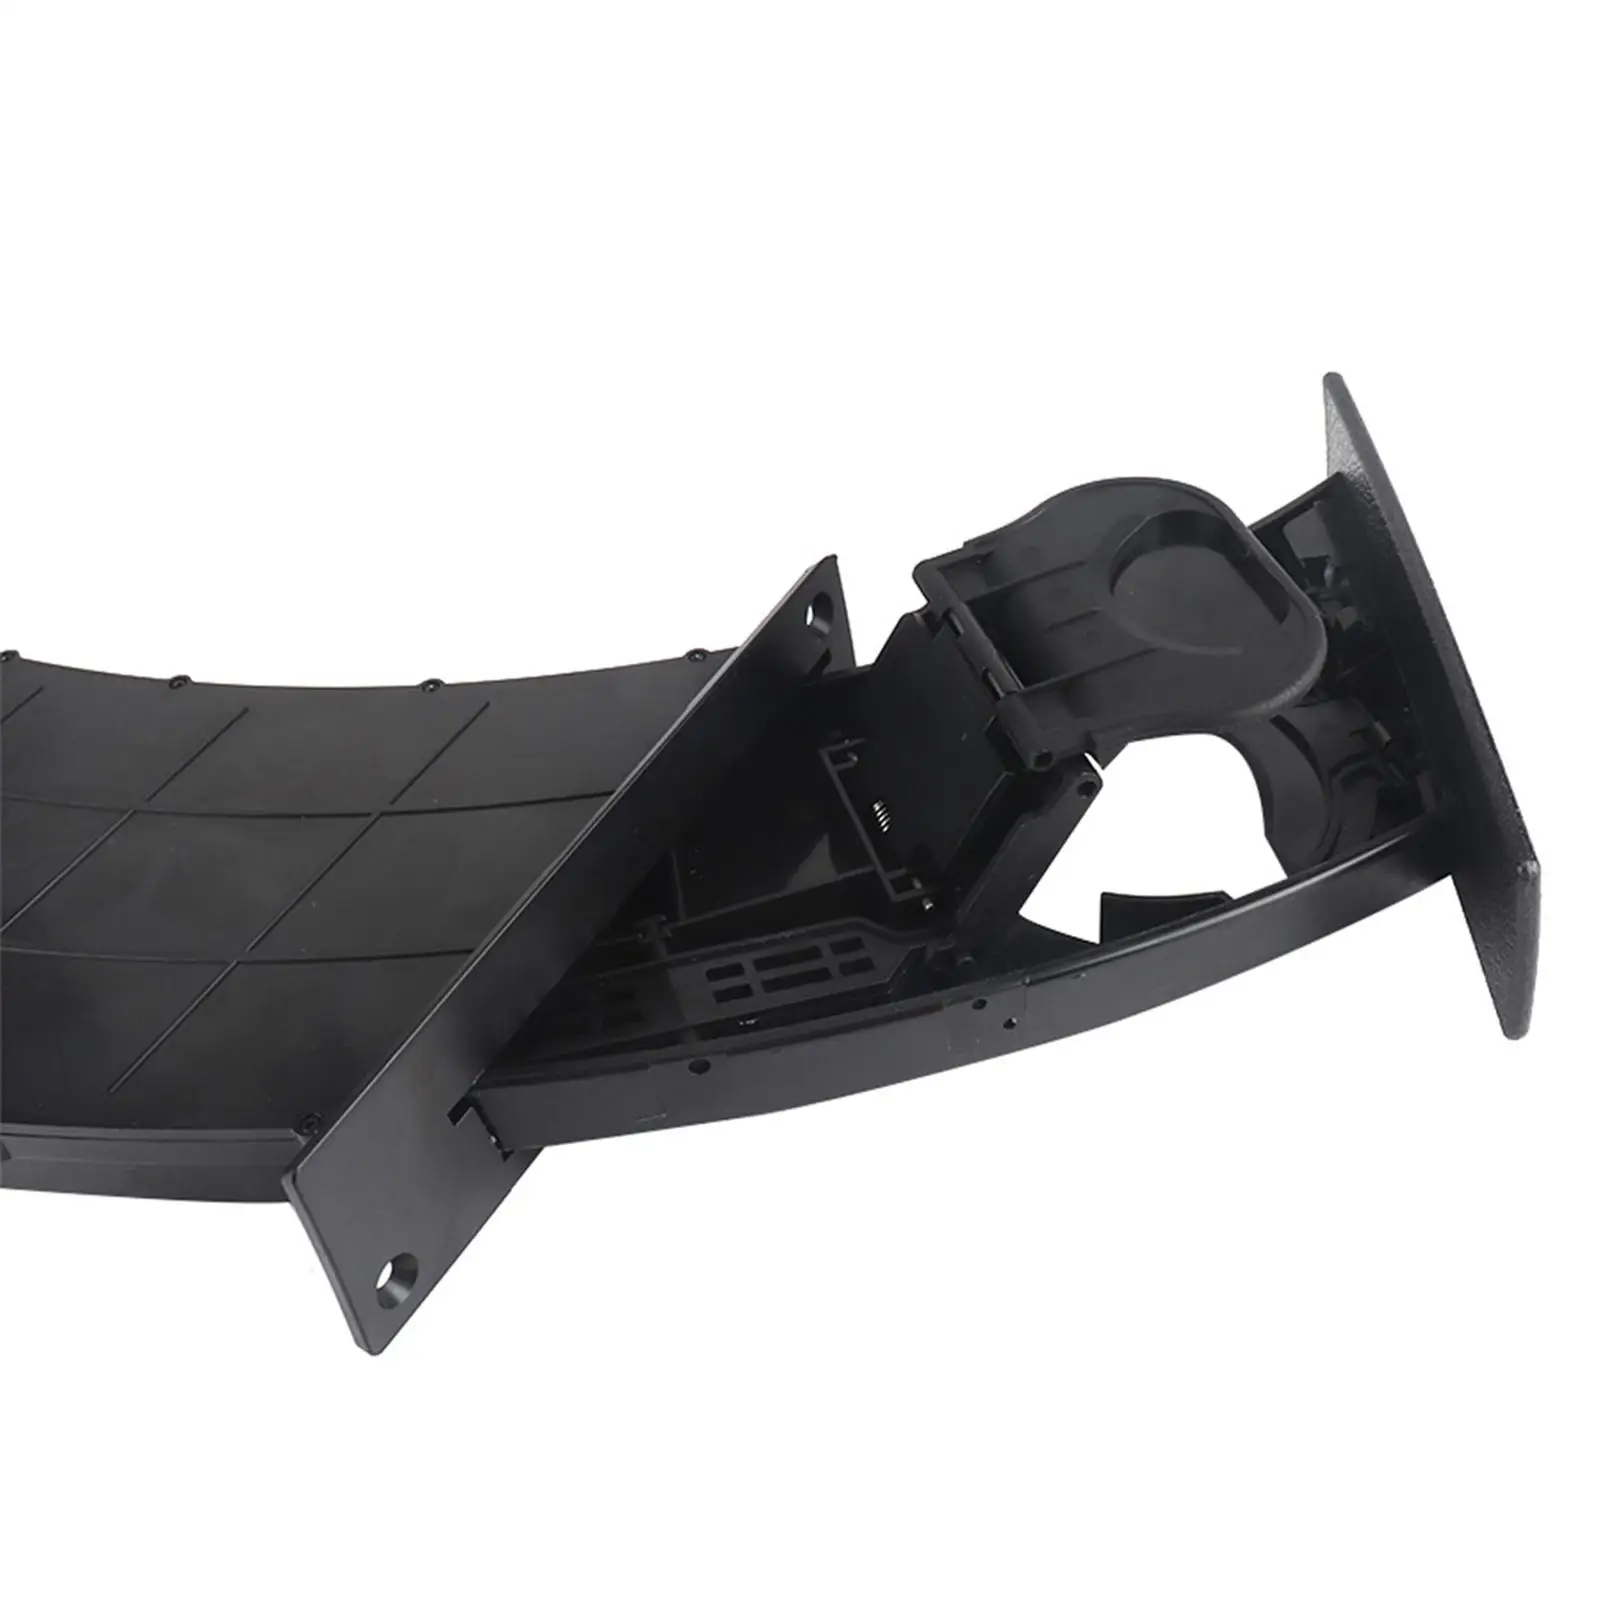 Vehicle Left Side Dashboard Cup Holder 51459125622 Uro009752 Retractable for BMW 525i 545i 535i 535Xi 528Xi